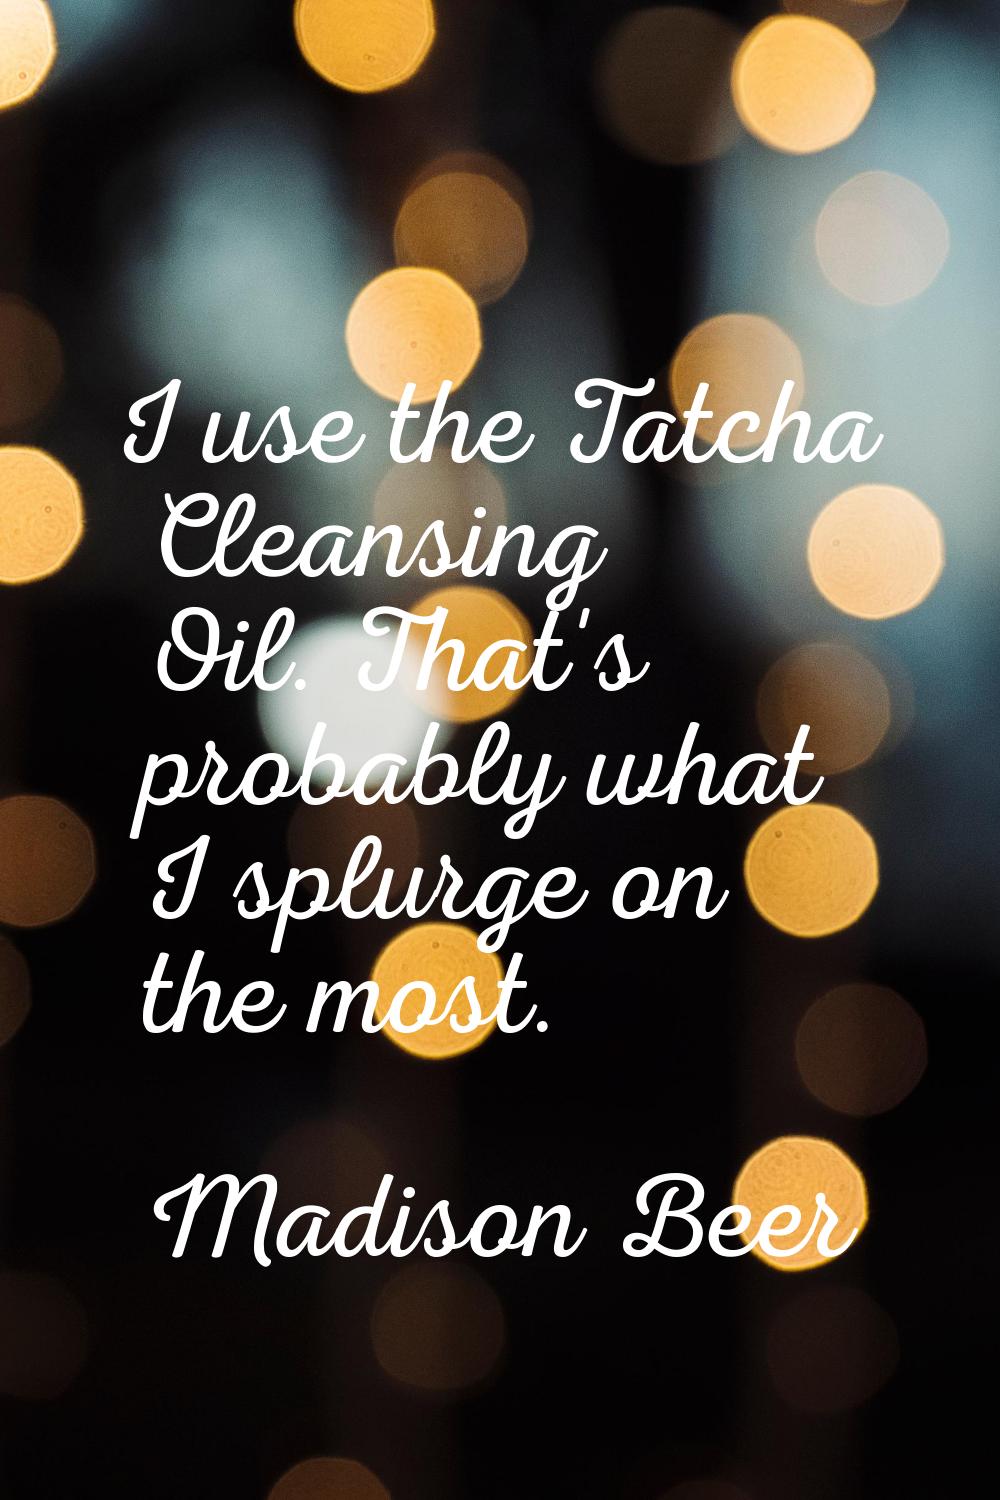 I use the Tatcha Cleansing Oil. That's probably what I splurge on the most.